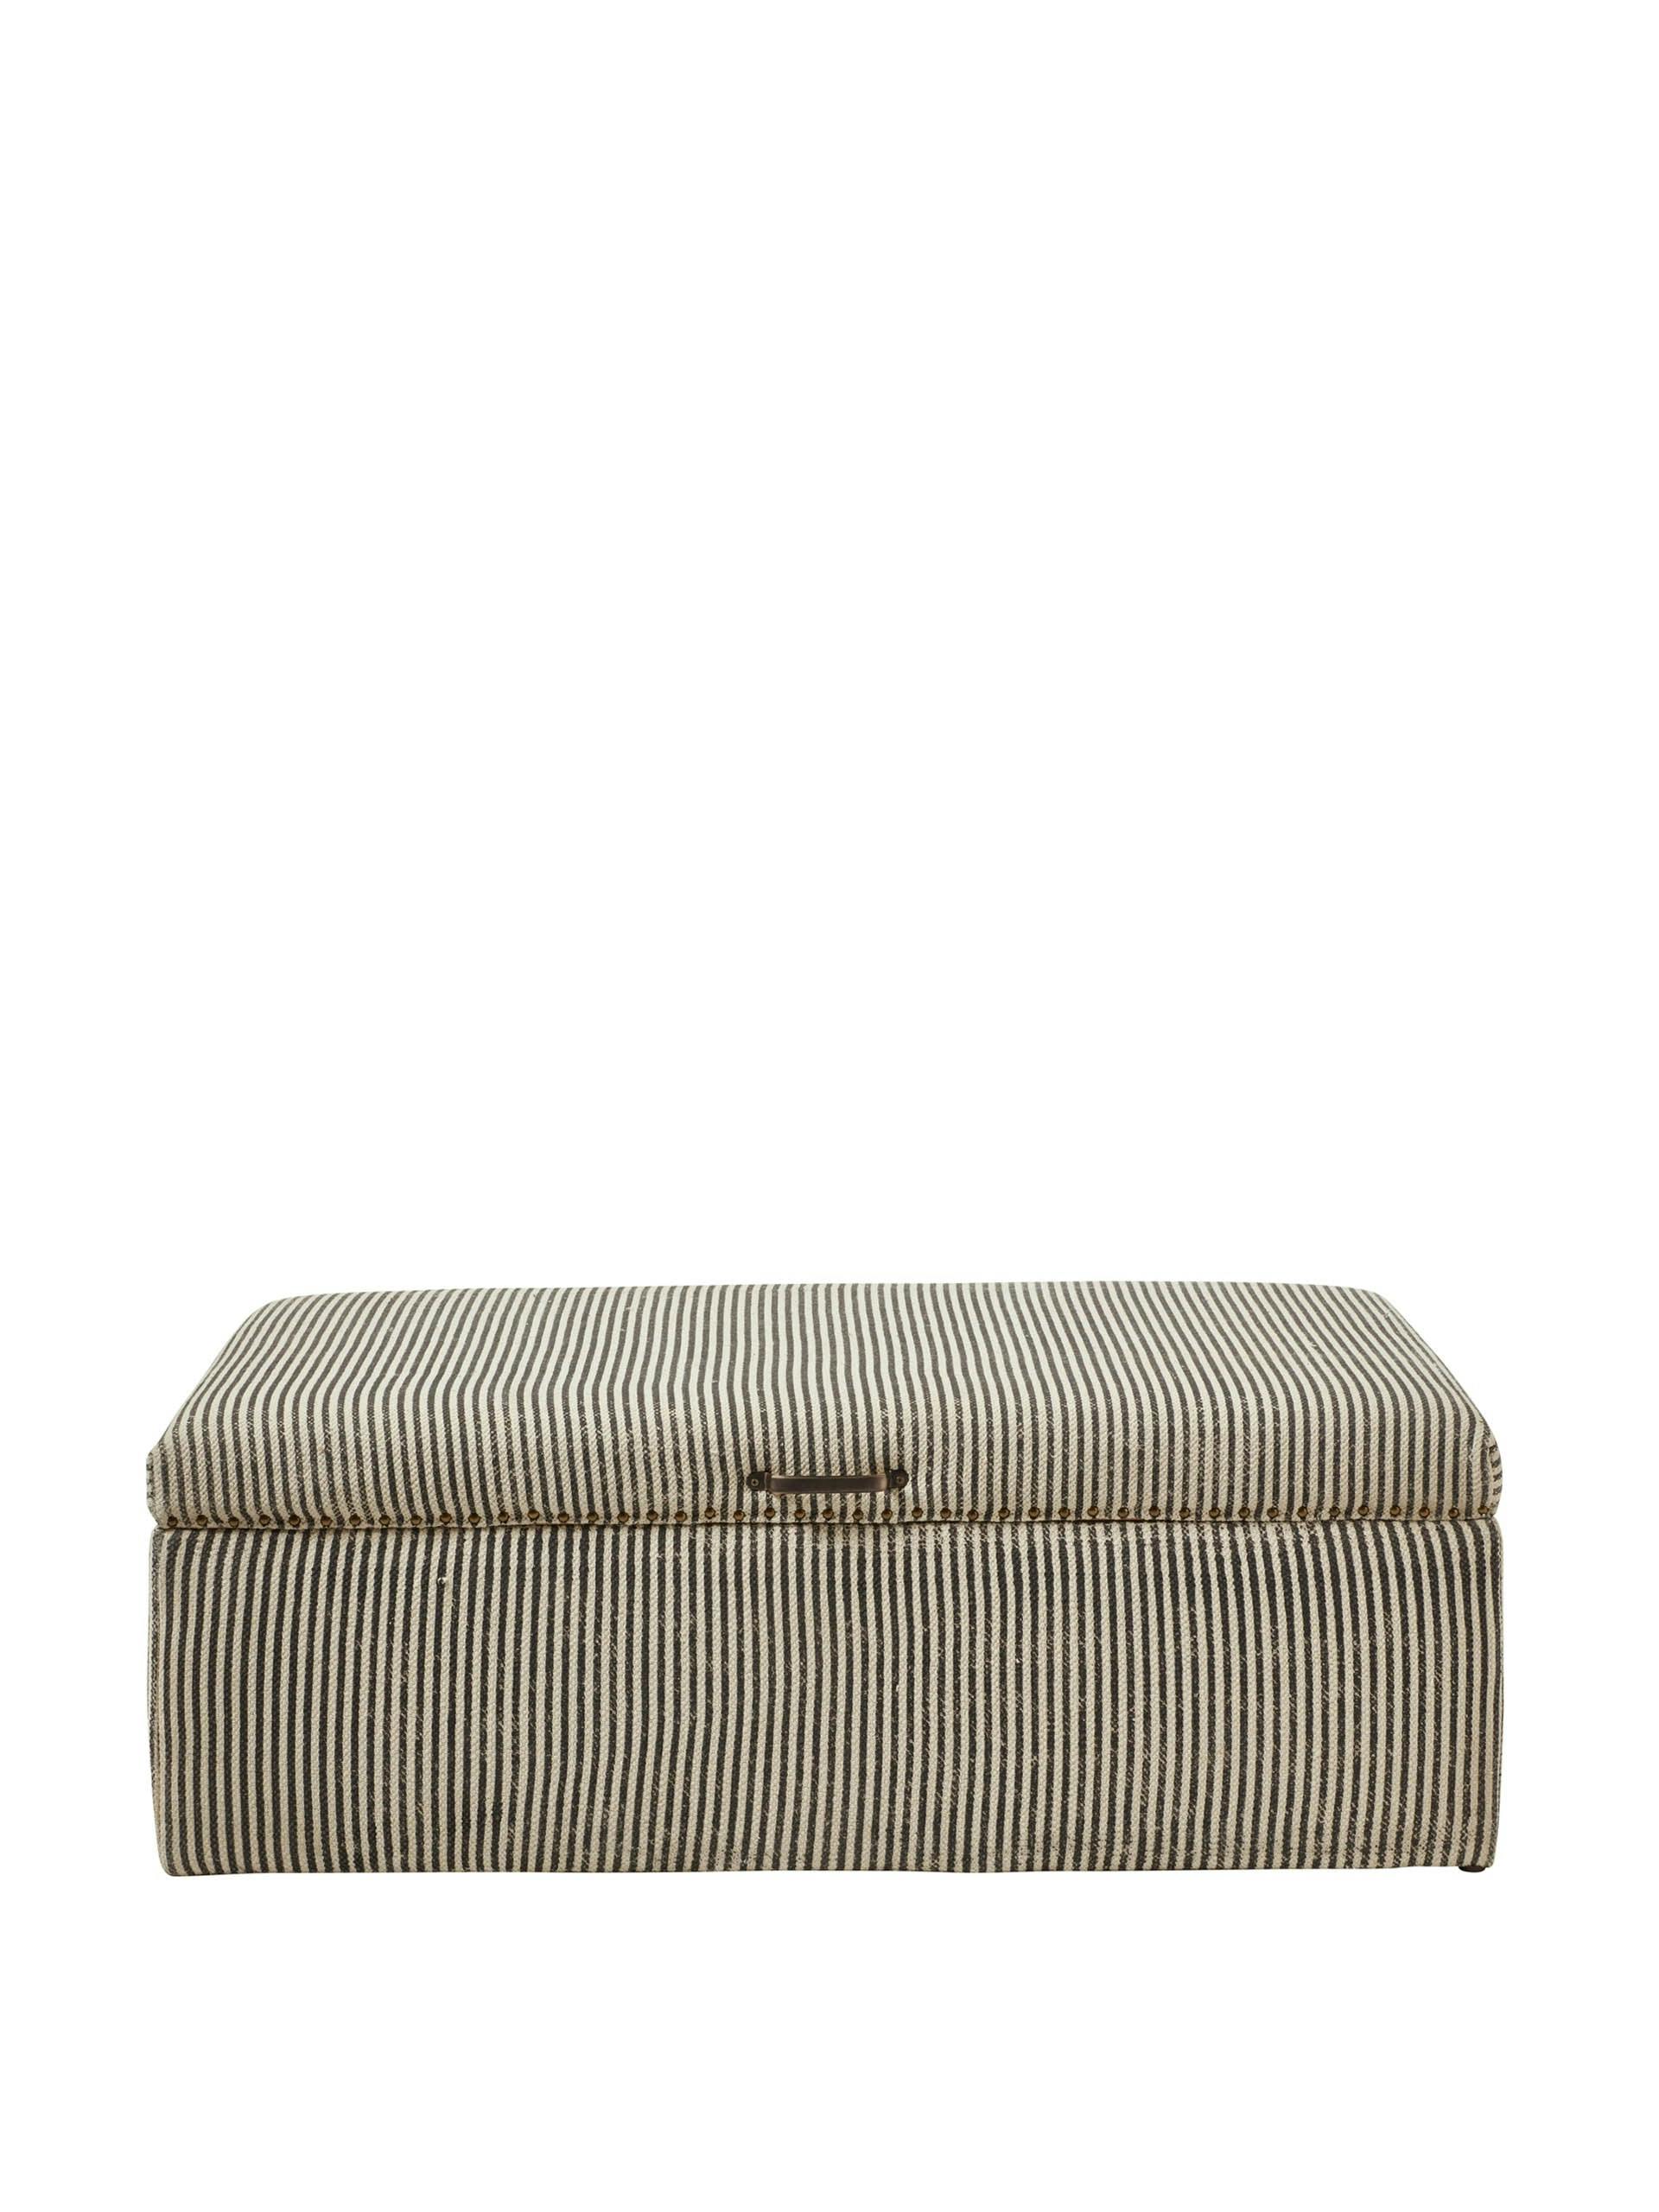 Charcoal striped upholstered ottoman